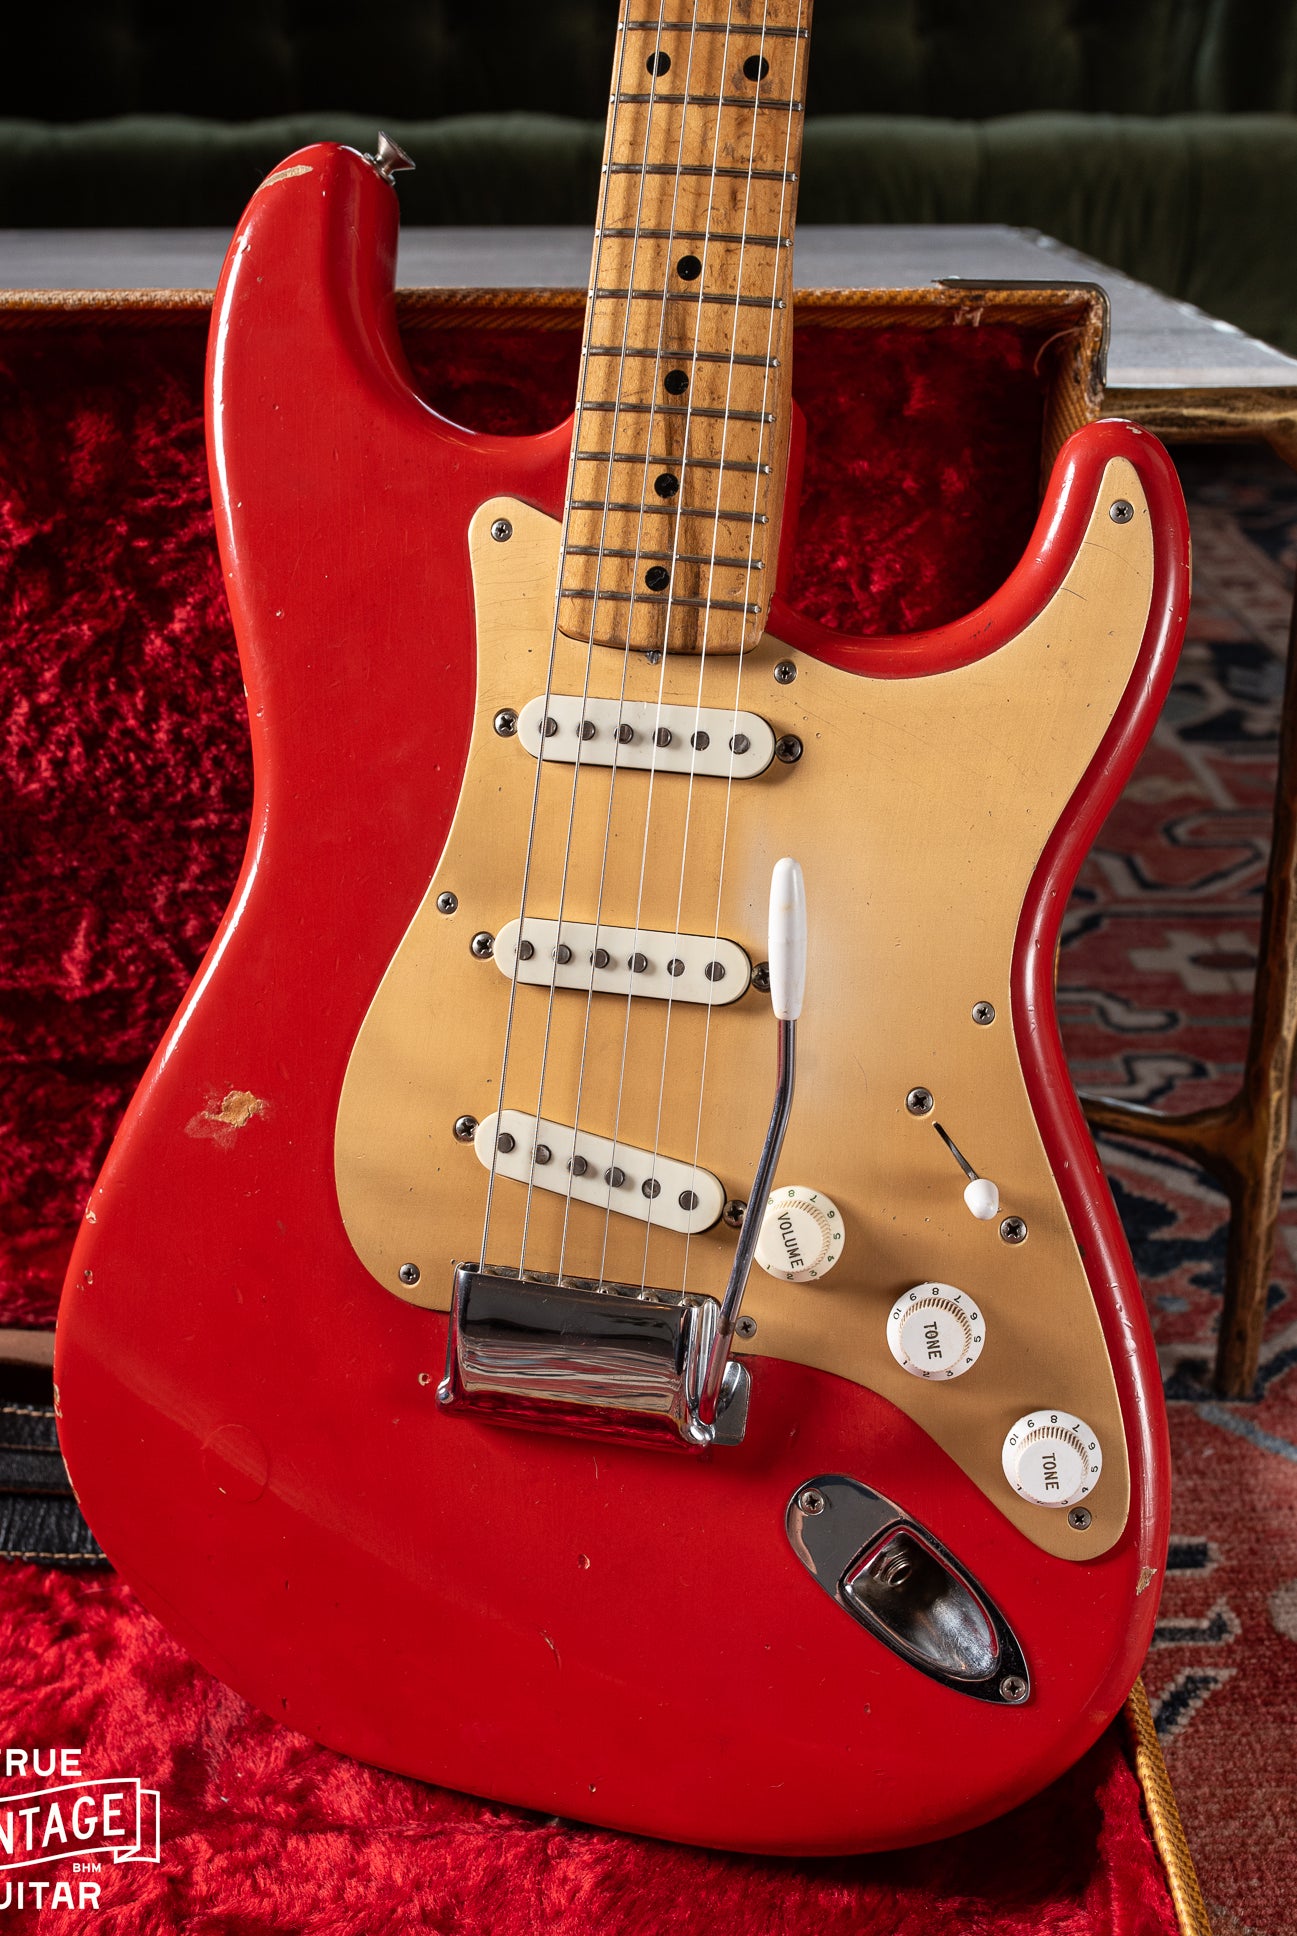 Roy Lanham's 1957 Fender Stratocaster Red with gold anodized aluminum pickguard